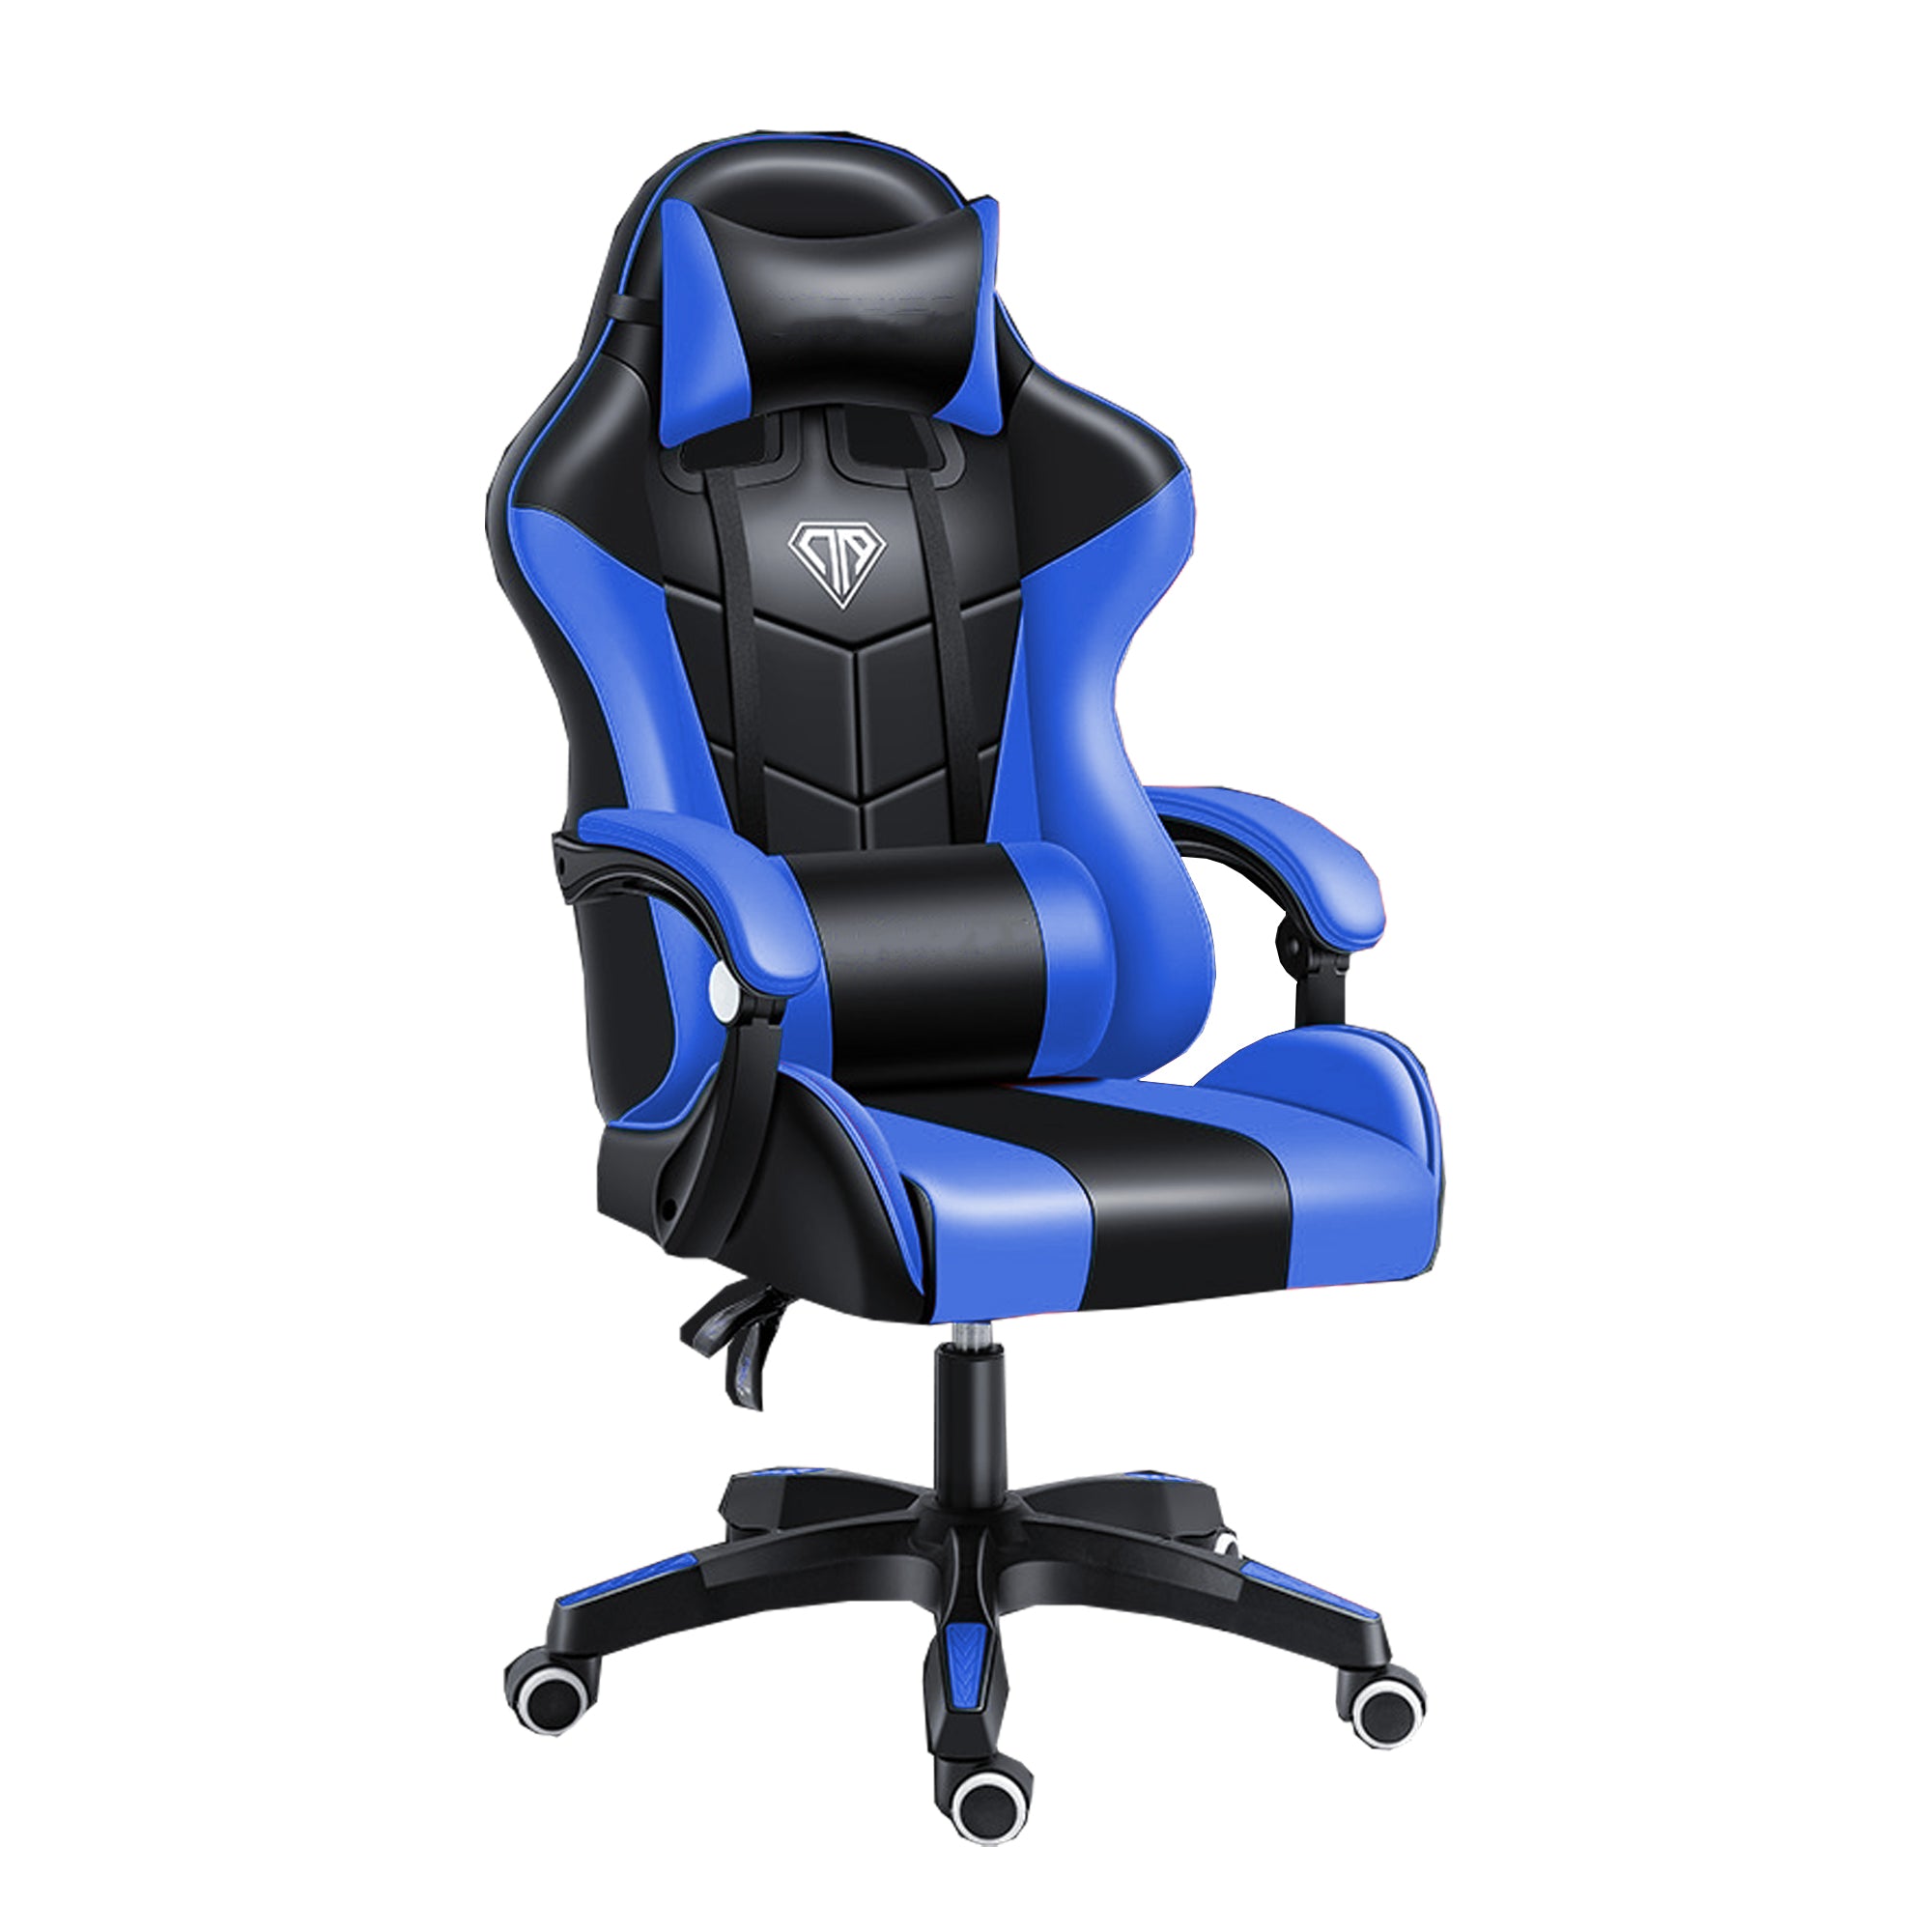 YT-1209 Gaming Chair with Headrest and Lumbar Support, PU Leather